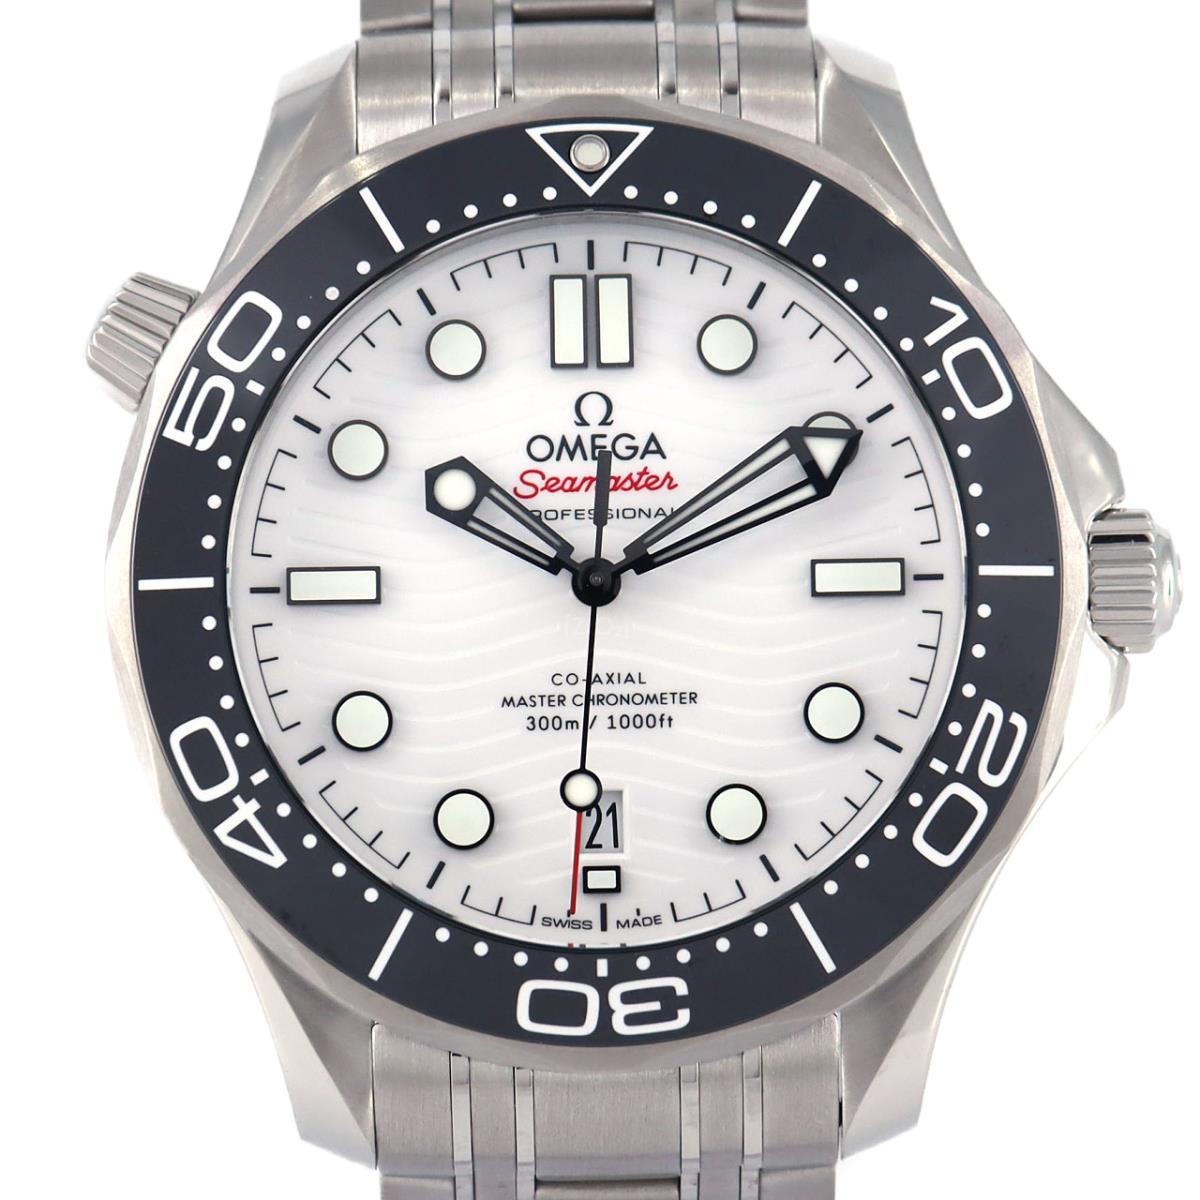 [BRAND NEW] Omega 210.30.42.20.04.001 Seamaster Diver 300M Automatic